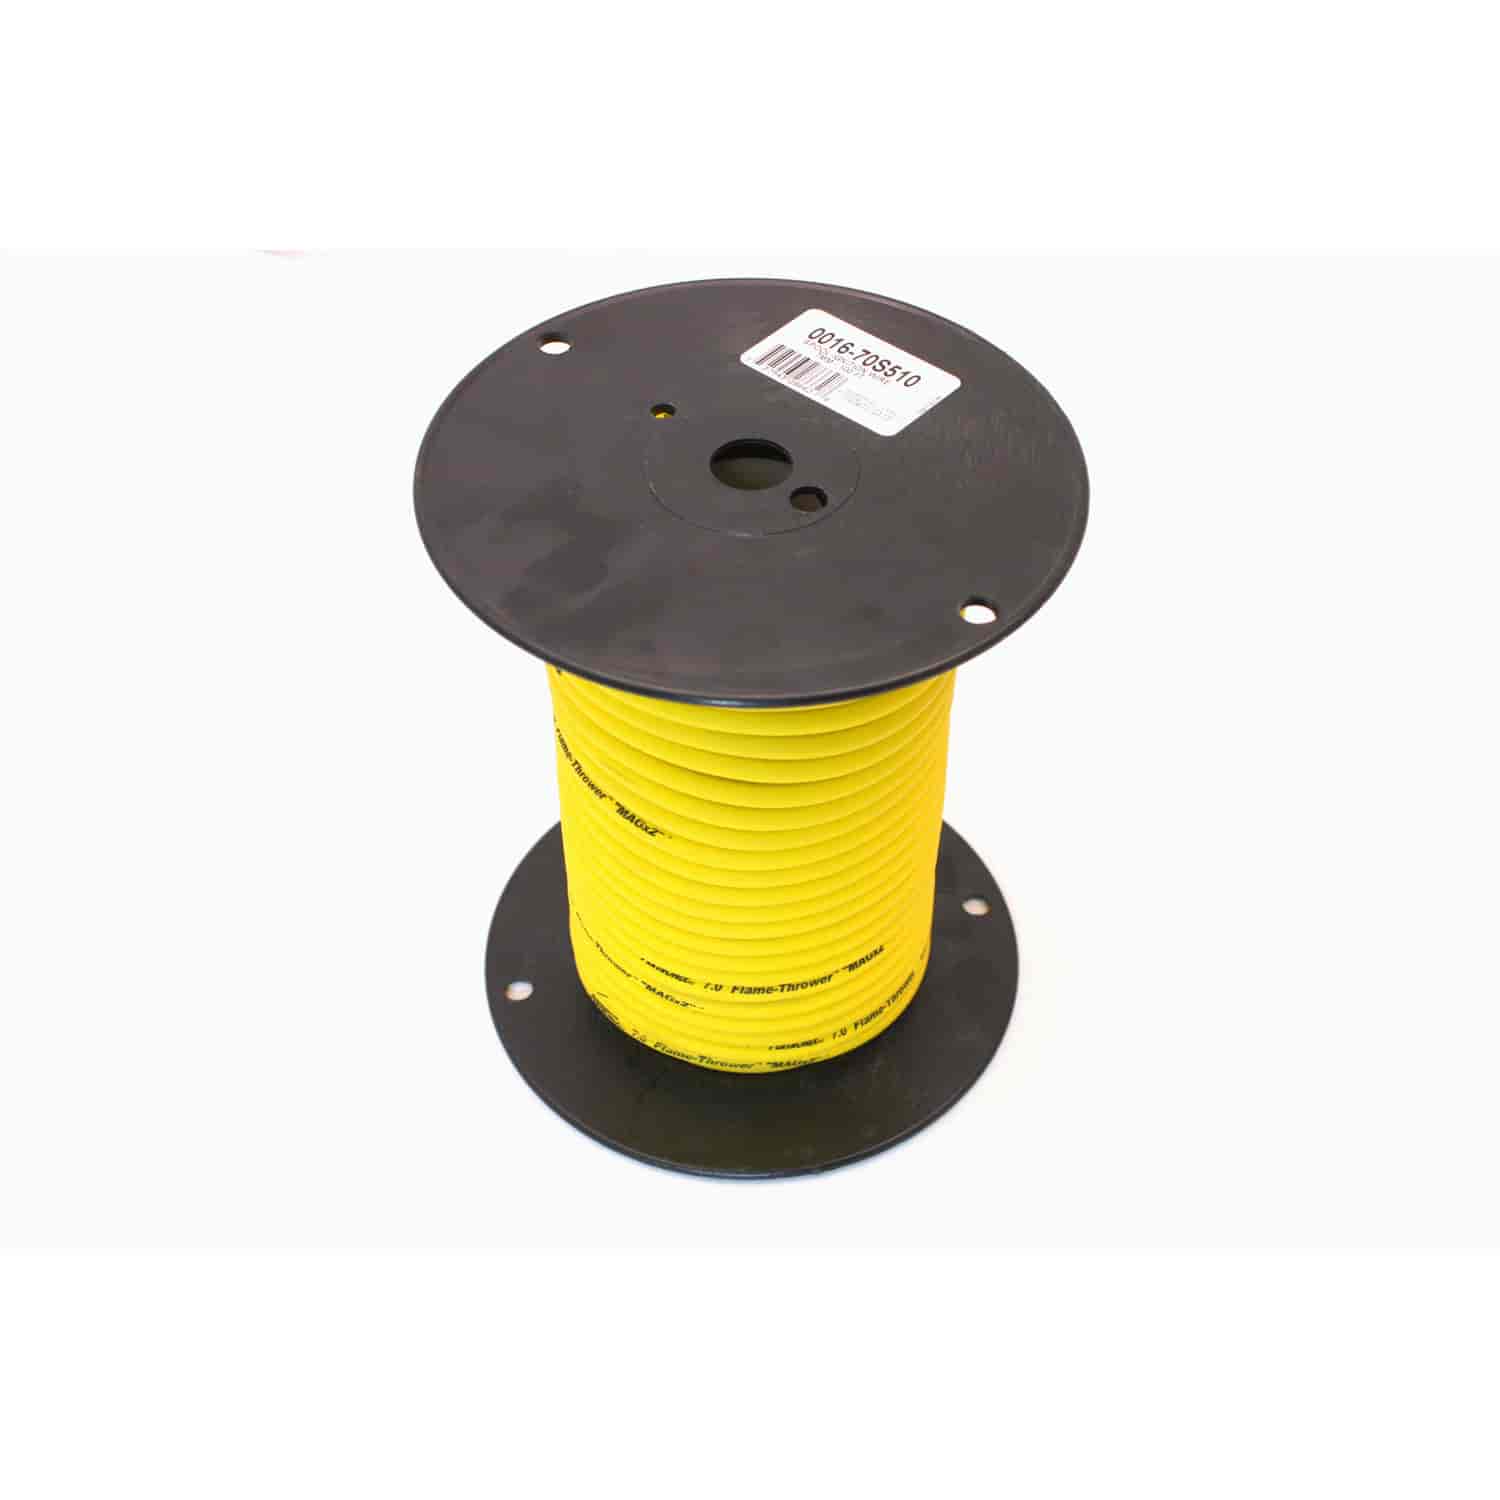 Wires 7mm Yellow - 100ft spool